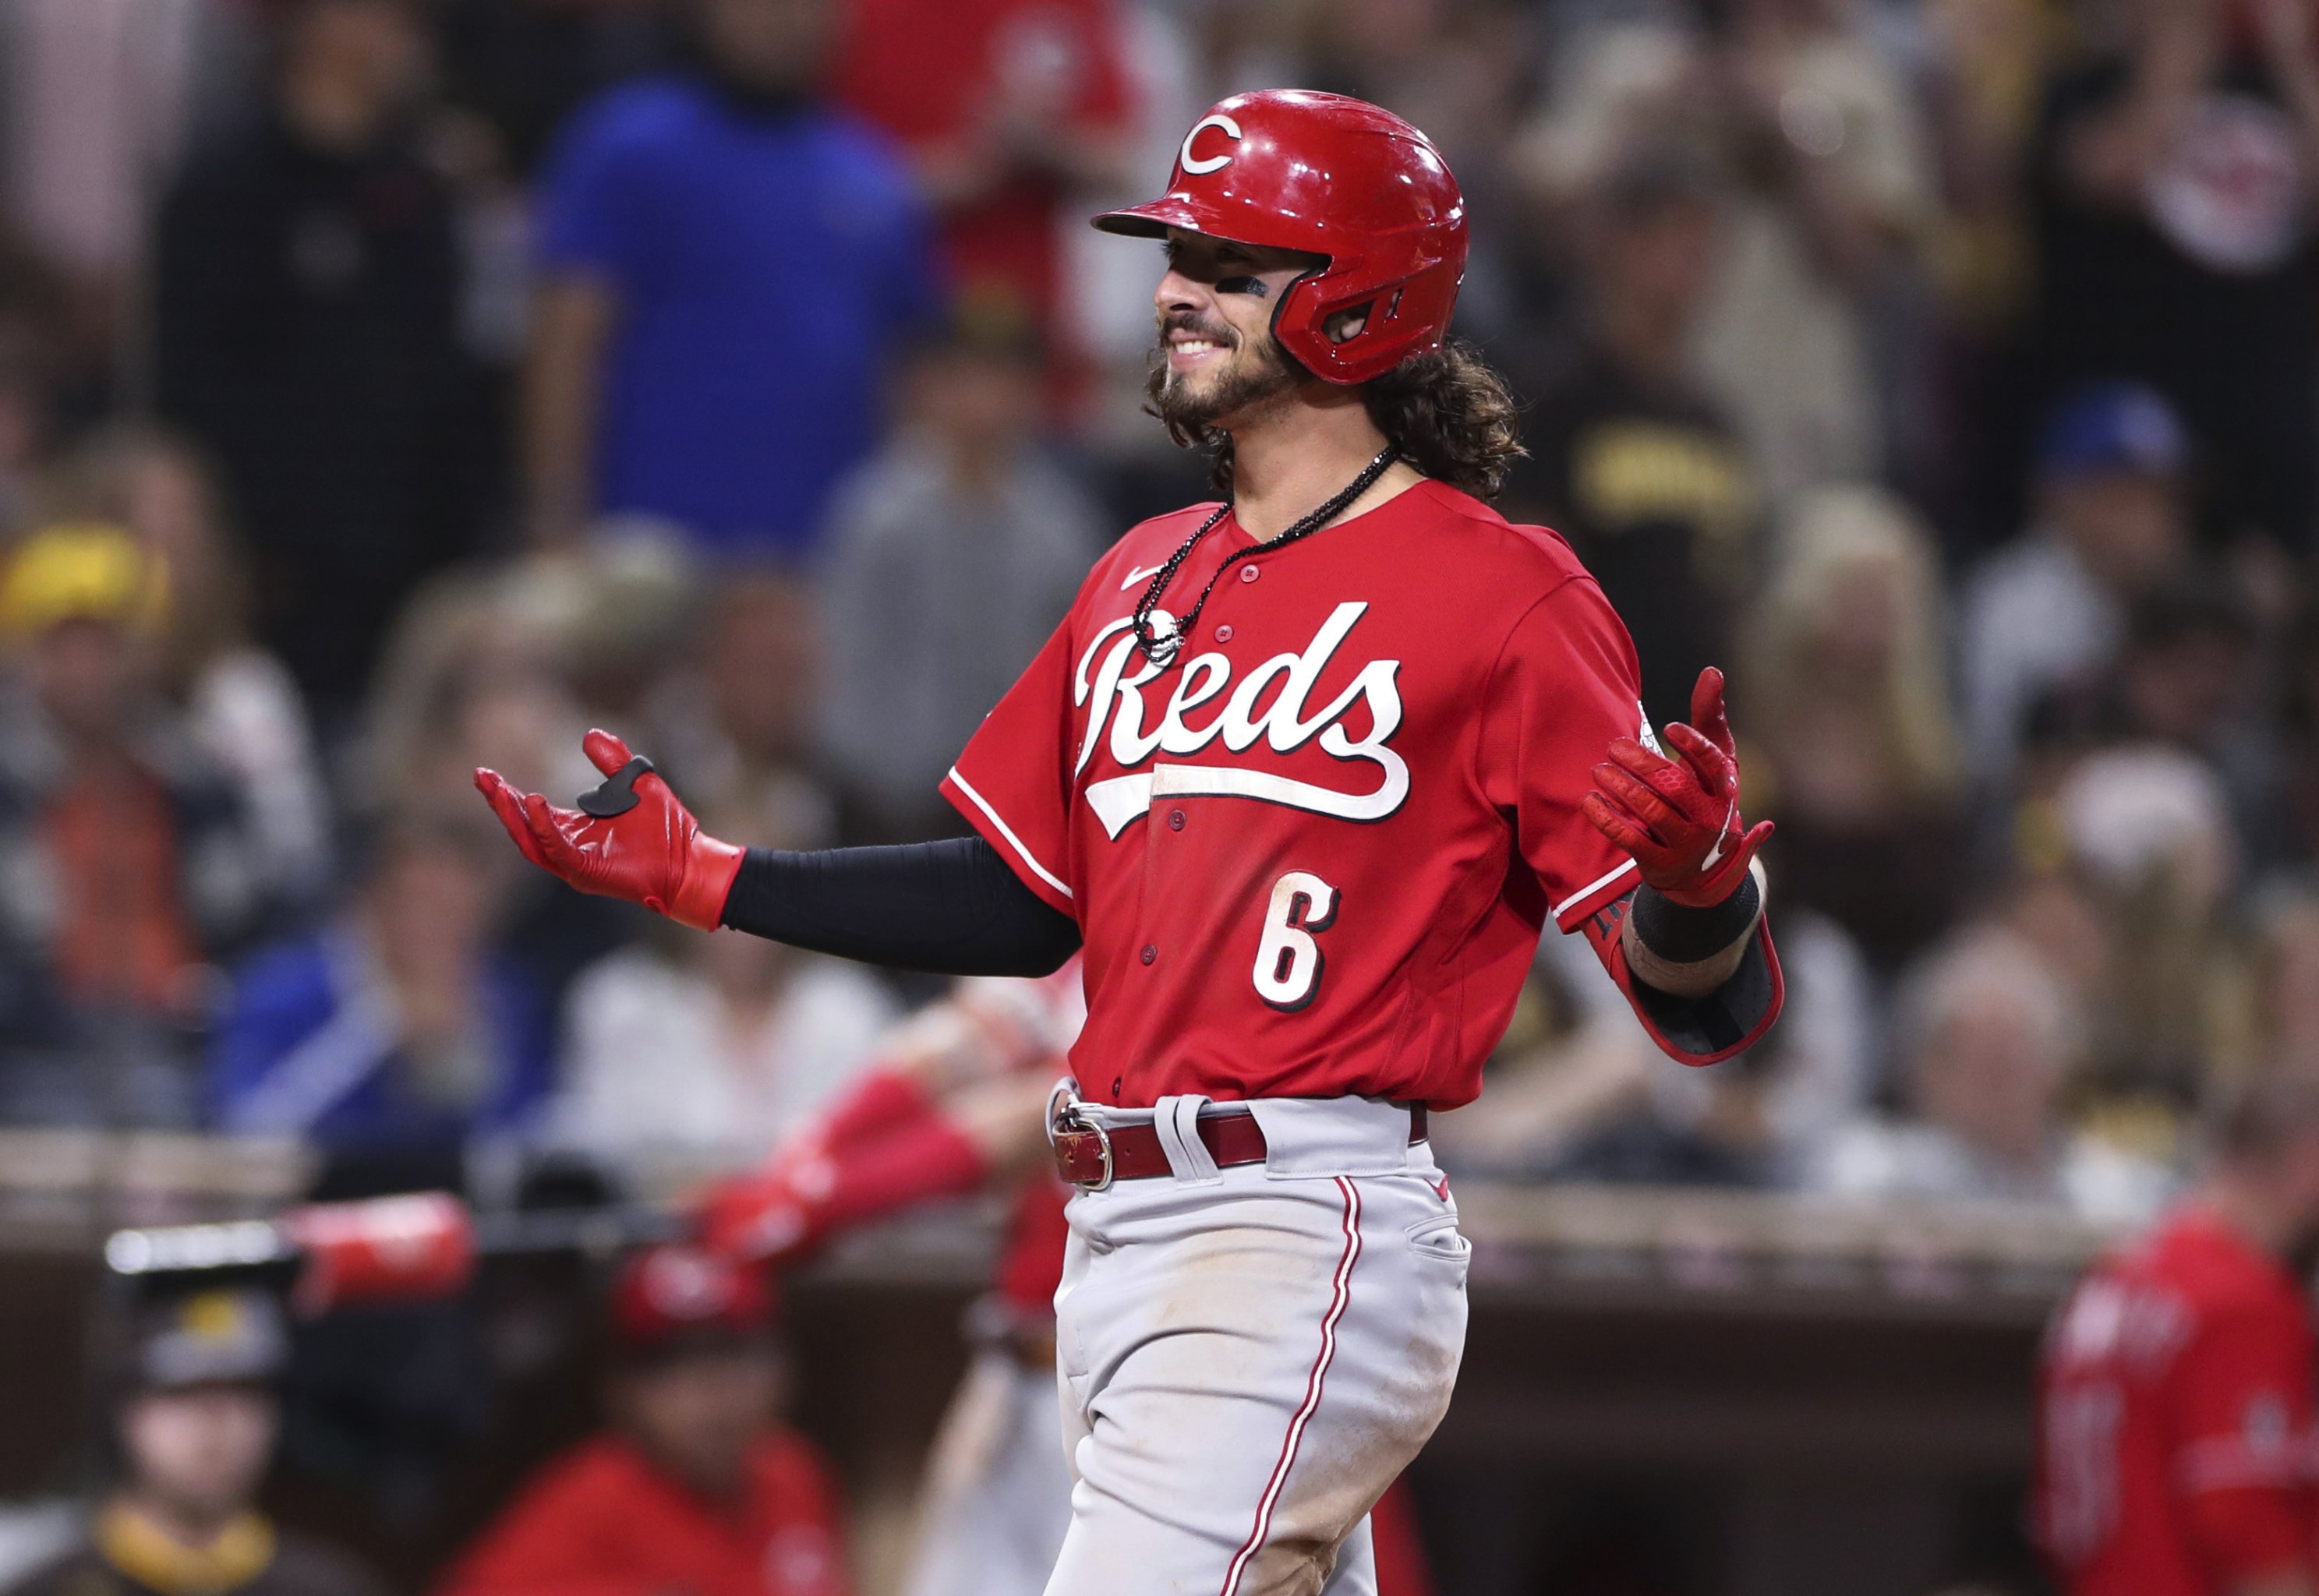 This Day in Reds History: Cincy bags Bichette in trade - Red Reporter